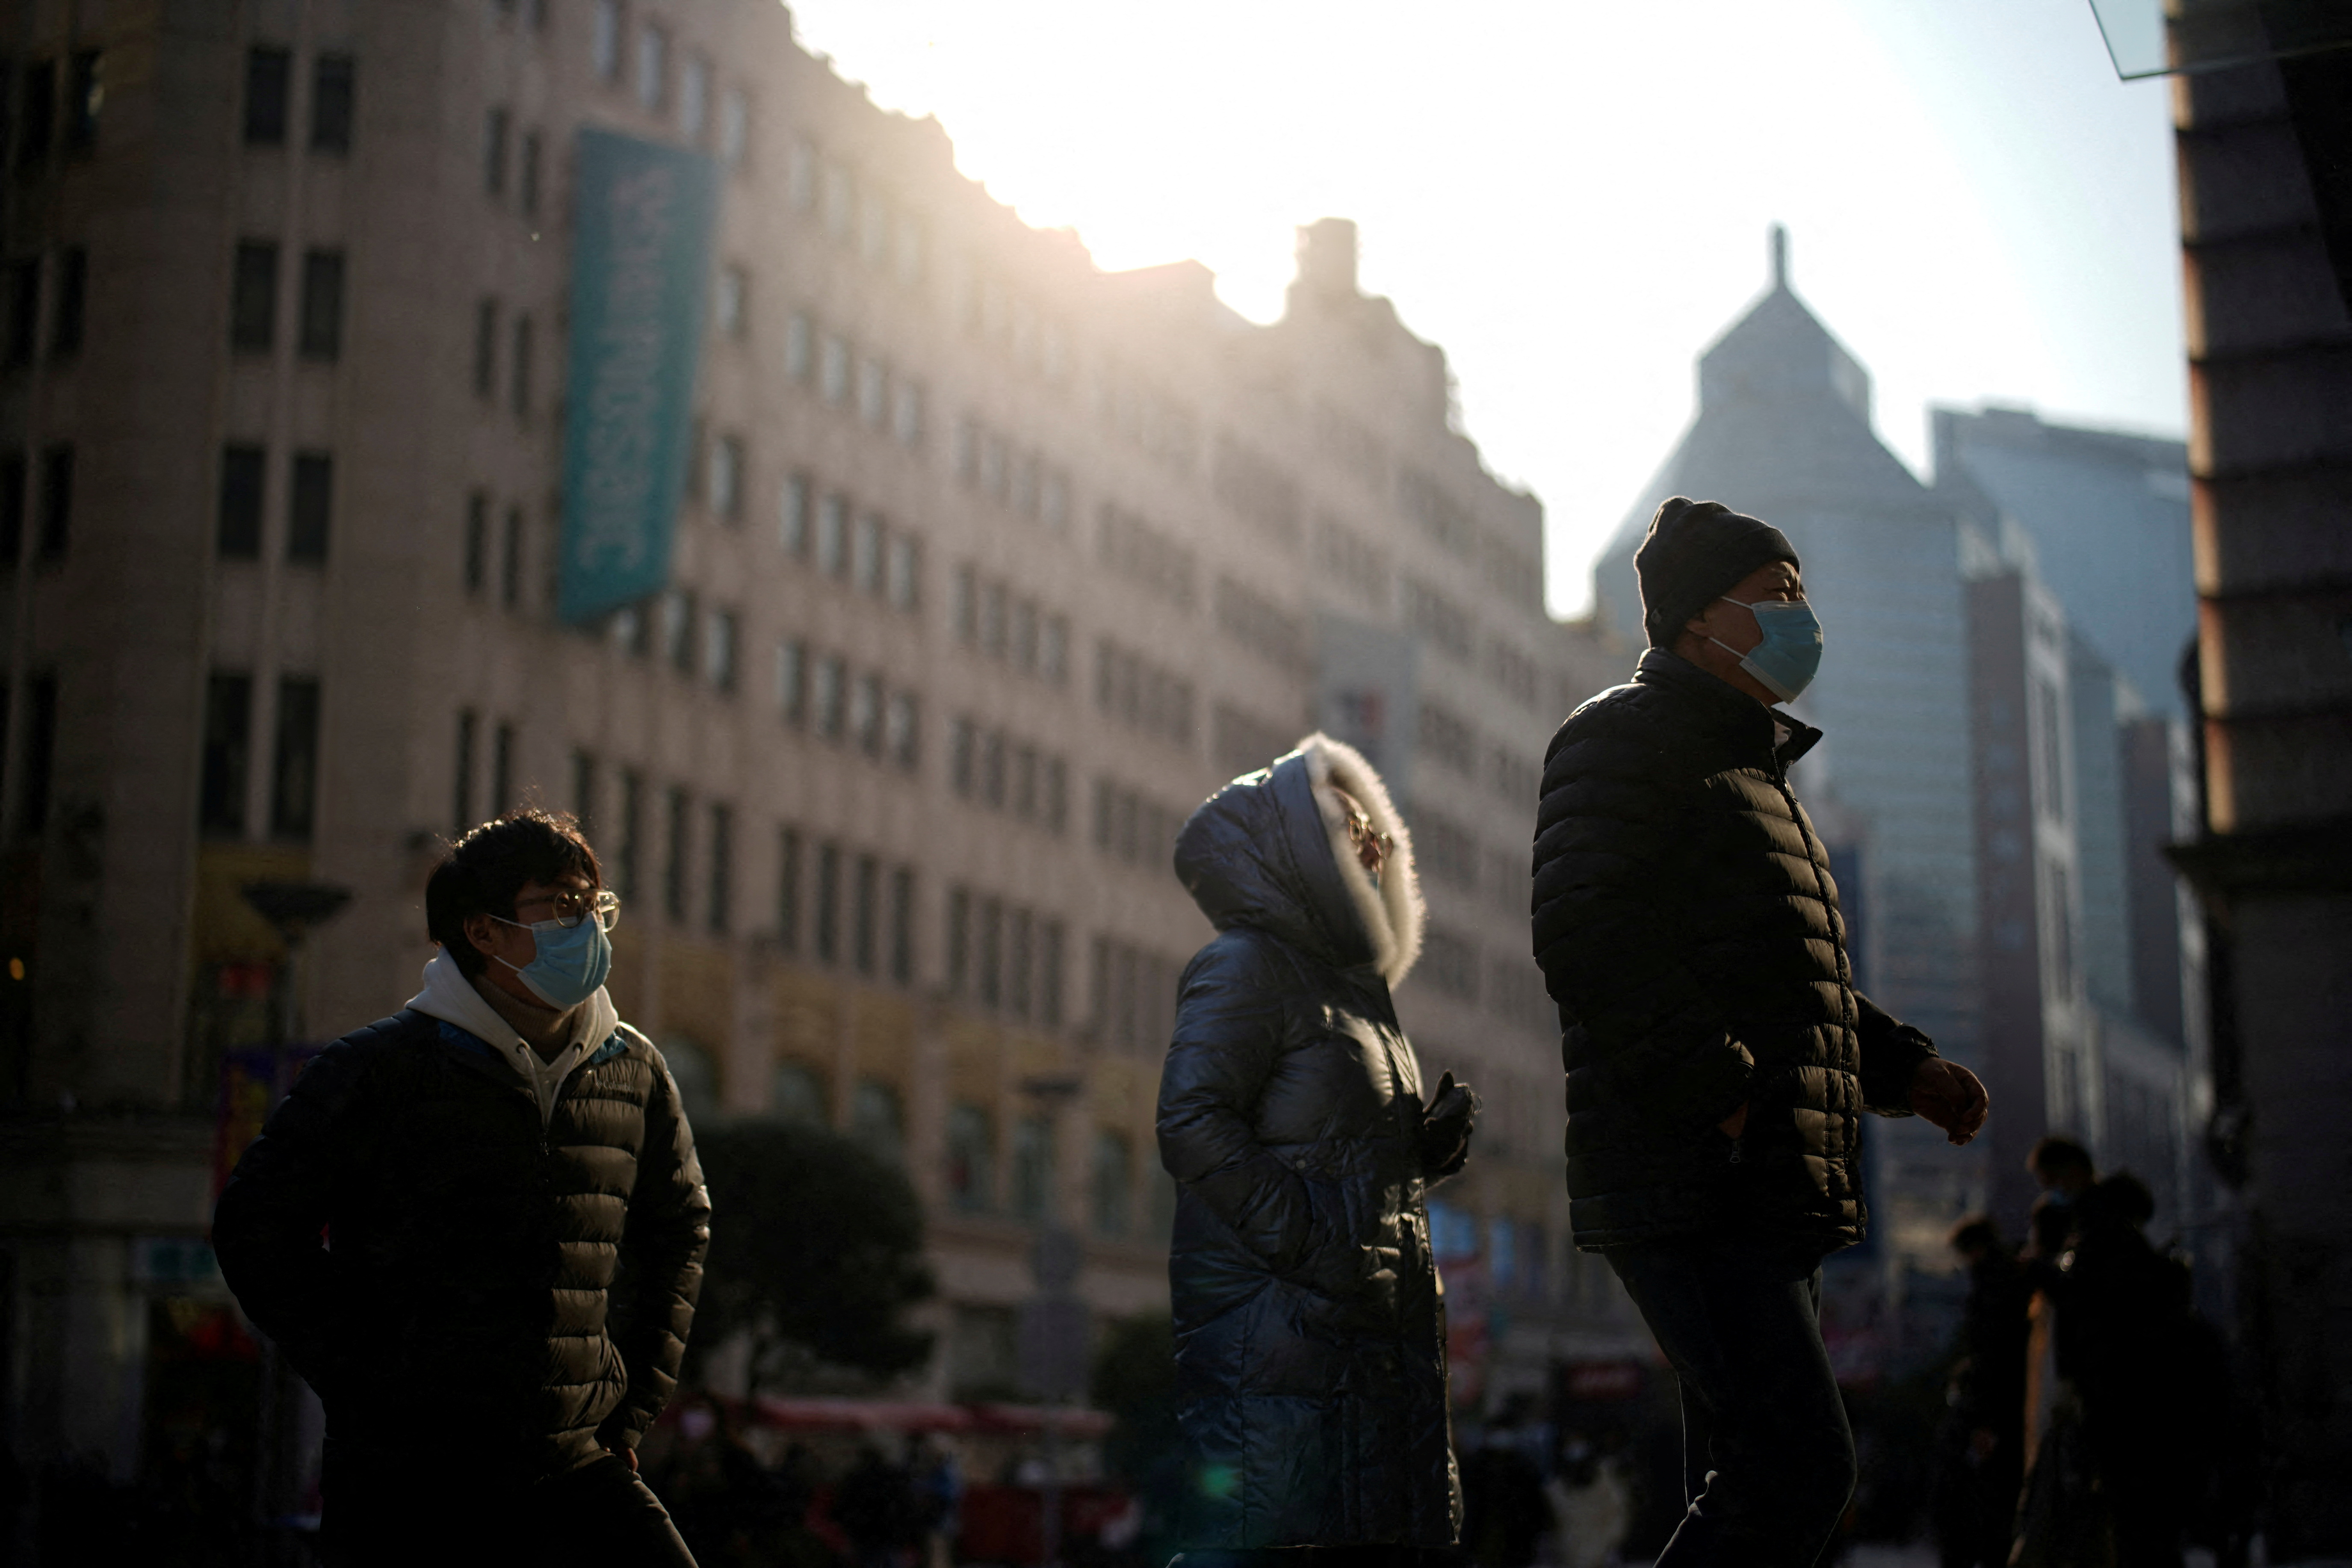 People wearing protective face masks walk on a street, following new cases of the coronavirus disease (COVID-19), in Shanghai, China, December 30, 2021. REUTERS/Aly Song